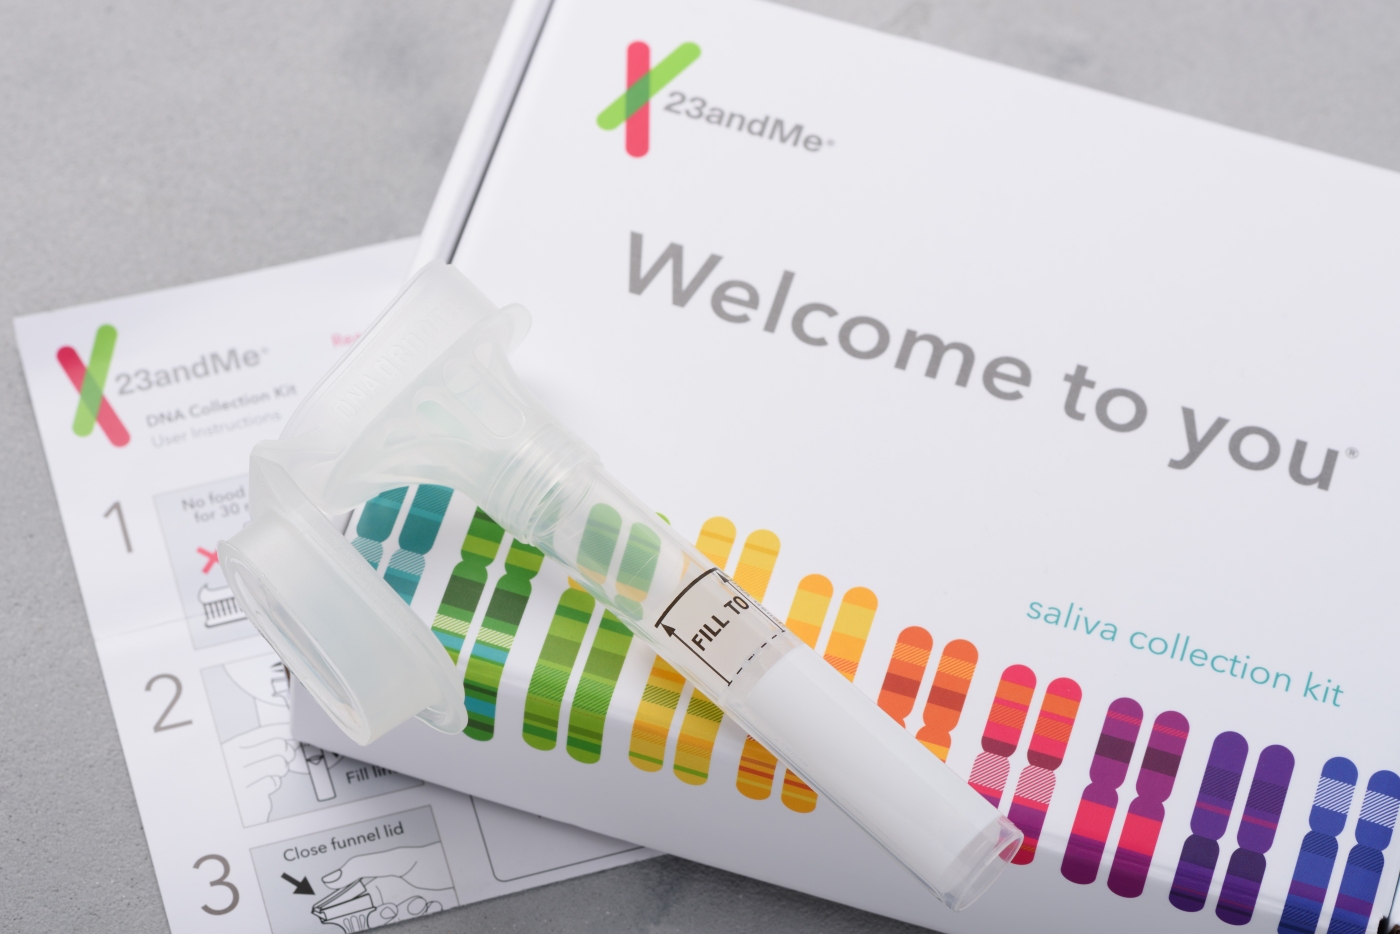 Fad or not? 23andMe lays off 14 percent of workforce in wake of declining sales